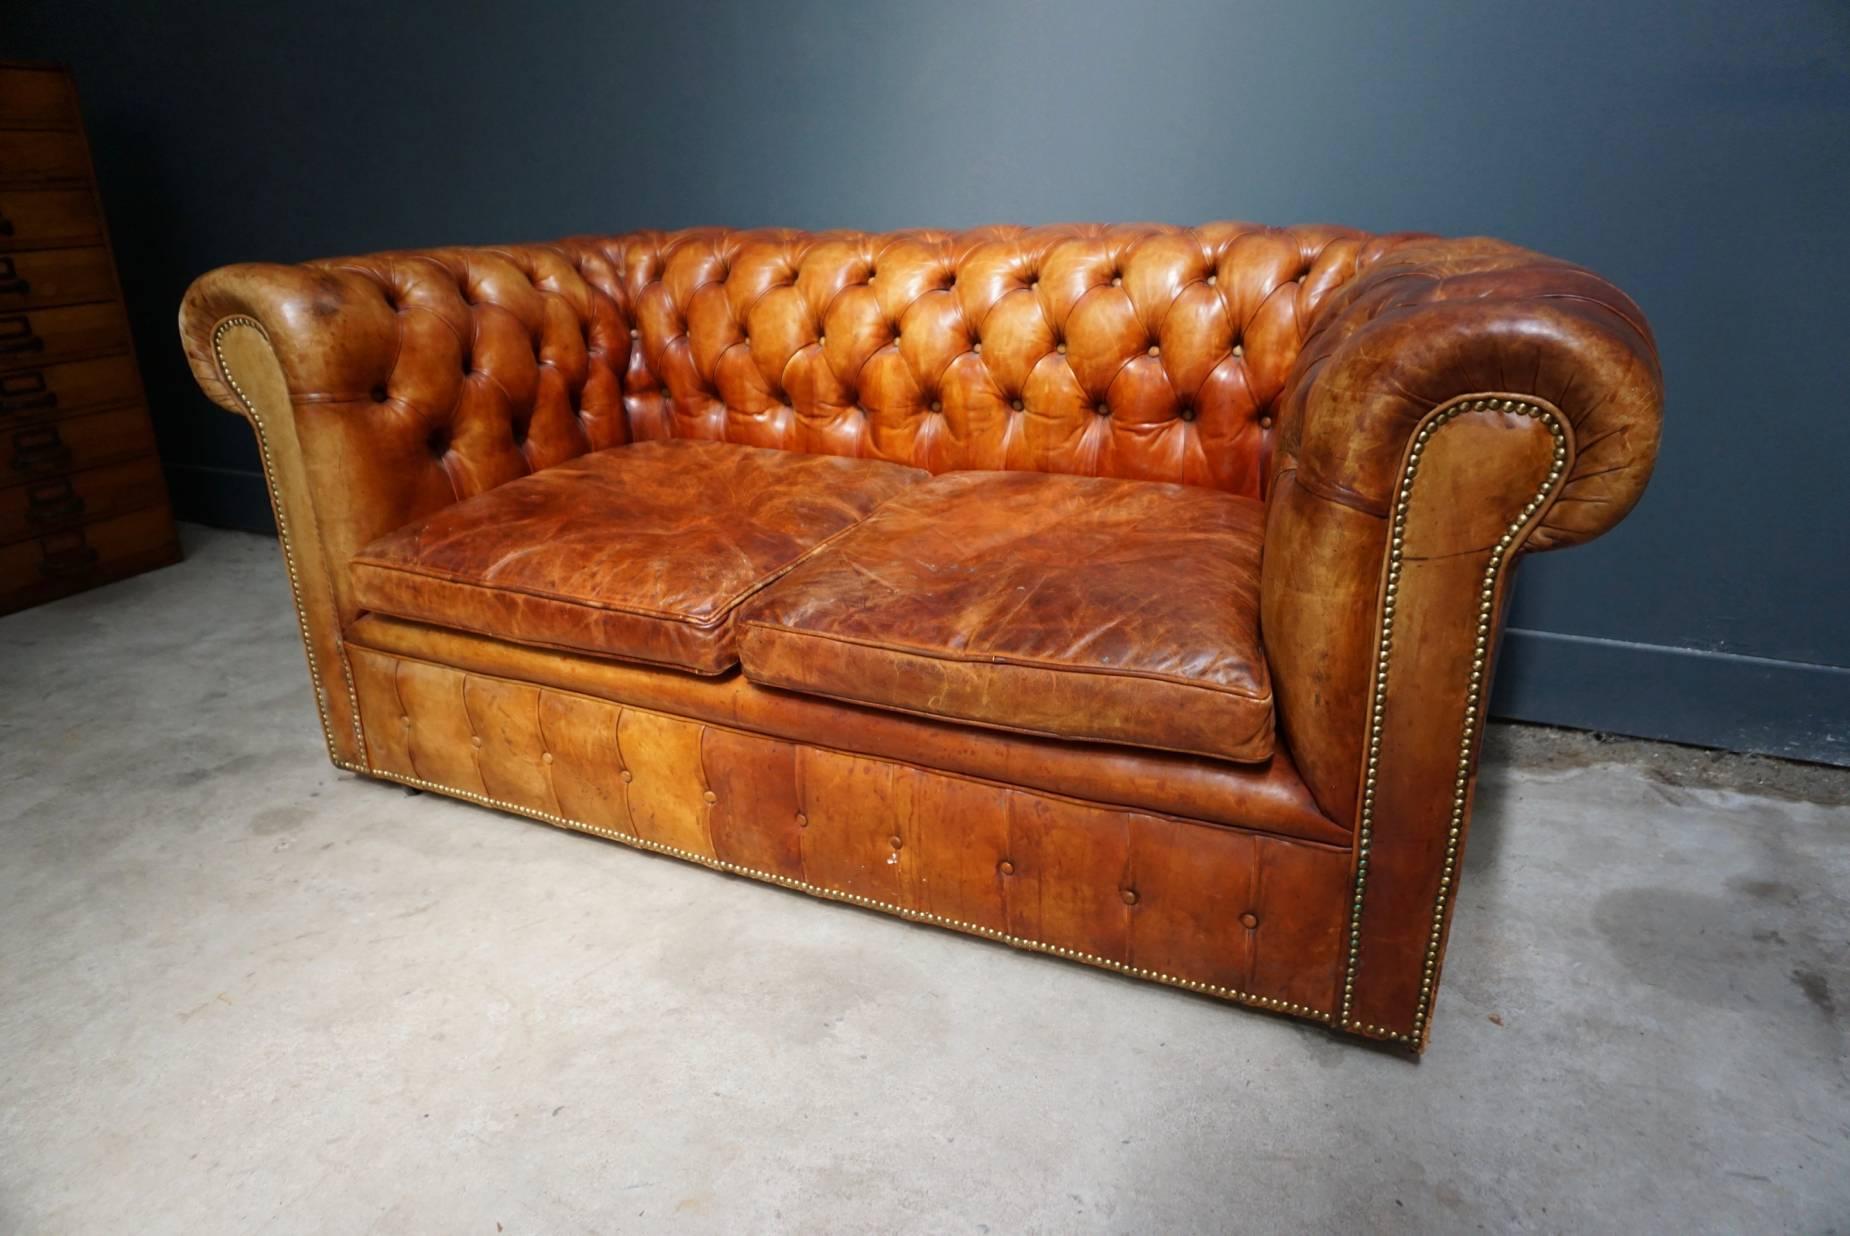 This vintage Chesterfield sofa was handmade in England, circa 1950-1960. The piece is upholstered in hand dyed cognac brown leather. The Chesterfield features loose cushions. It remains in a good vintage condition and retained a rich patina over the